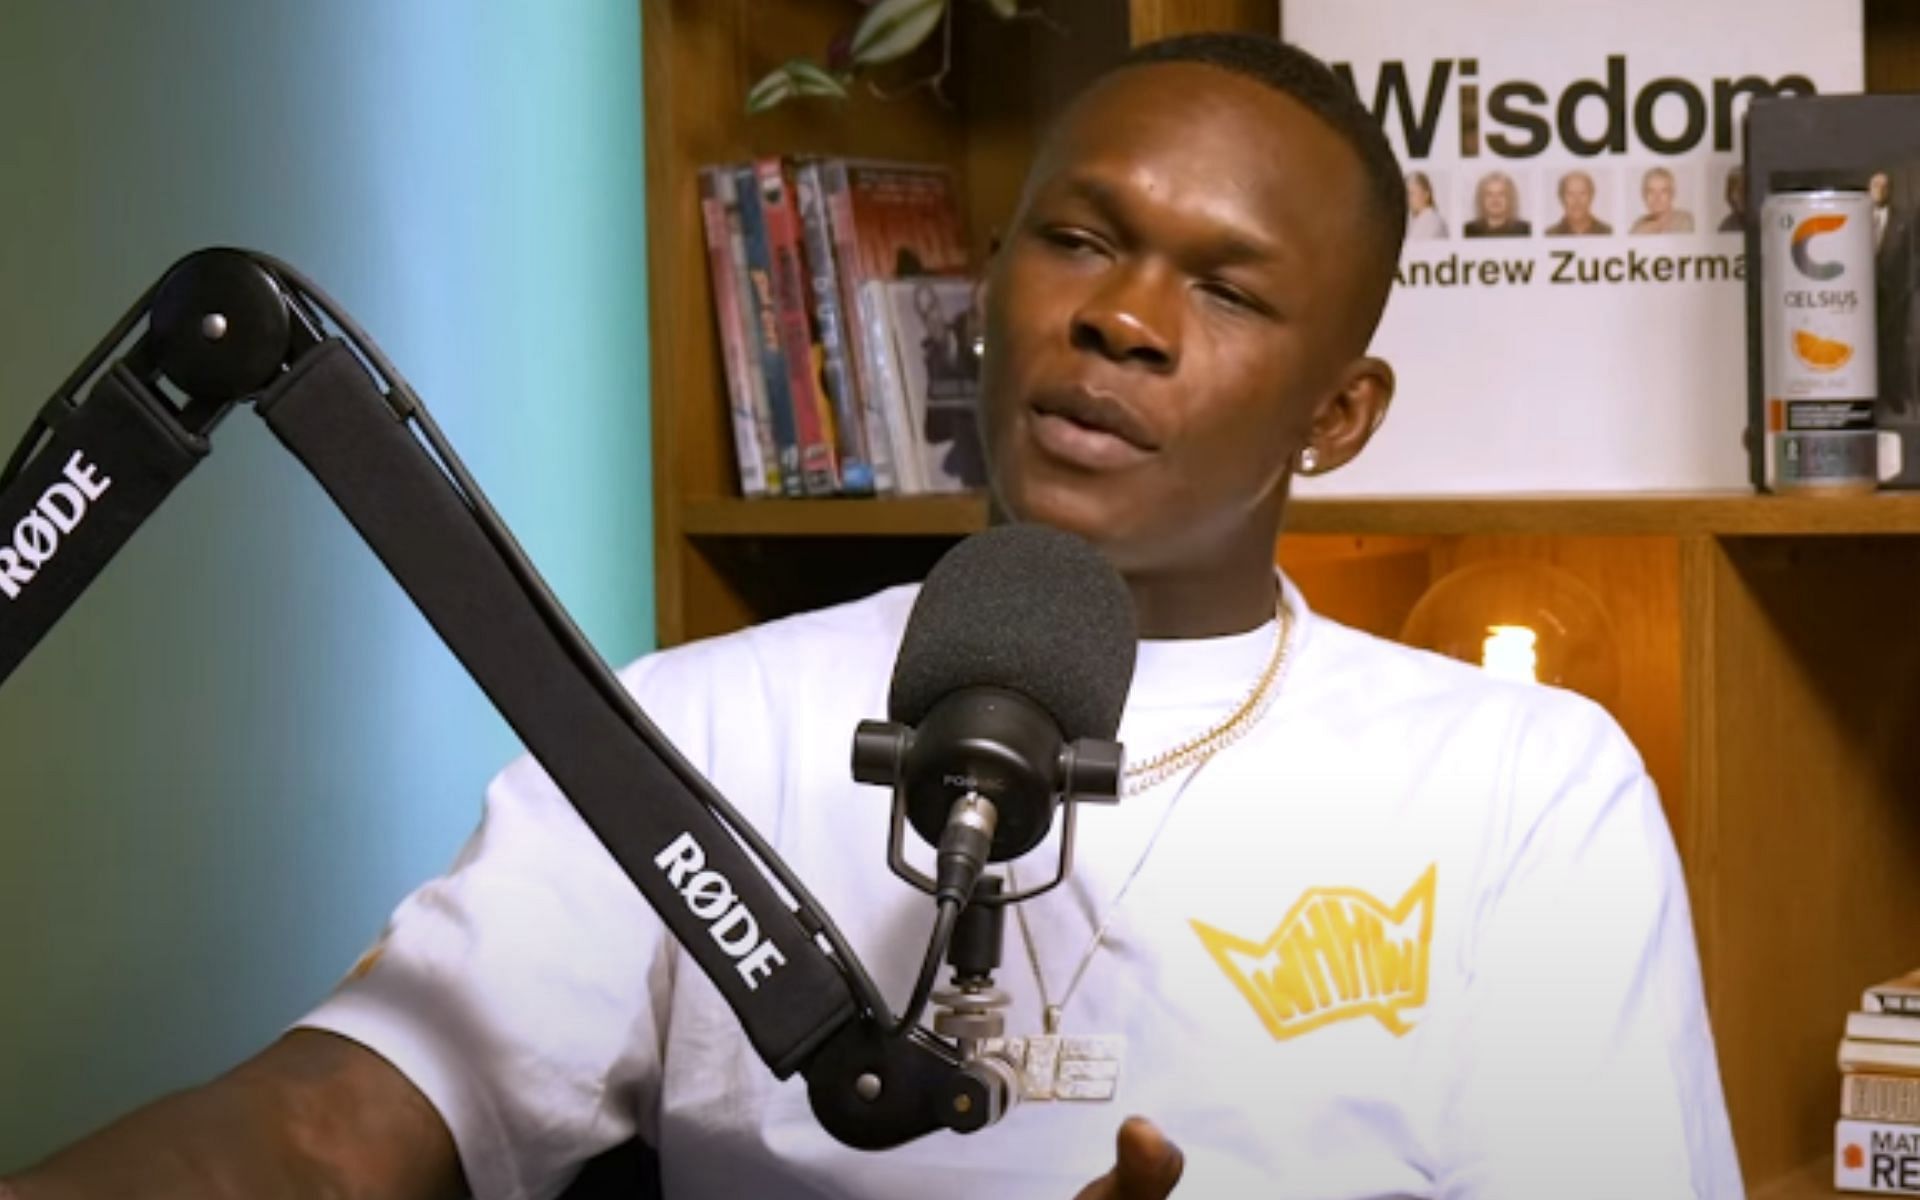 Israel Adesanya talks about how he is grateful that he found fame after he was matured [Image courtesy: Theo Von - YouTube]